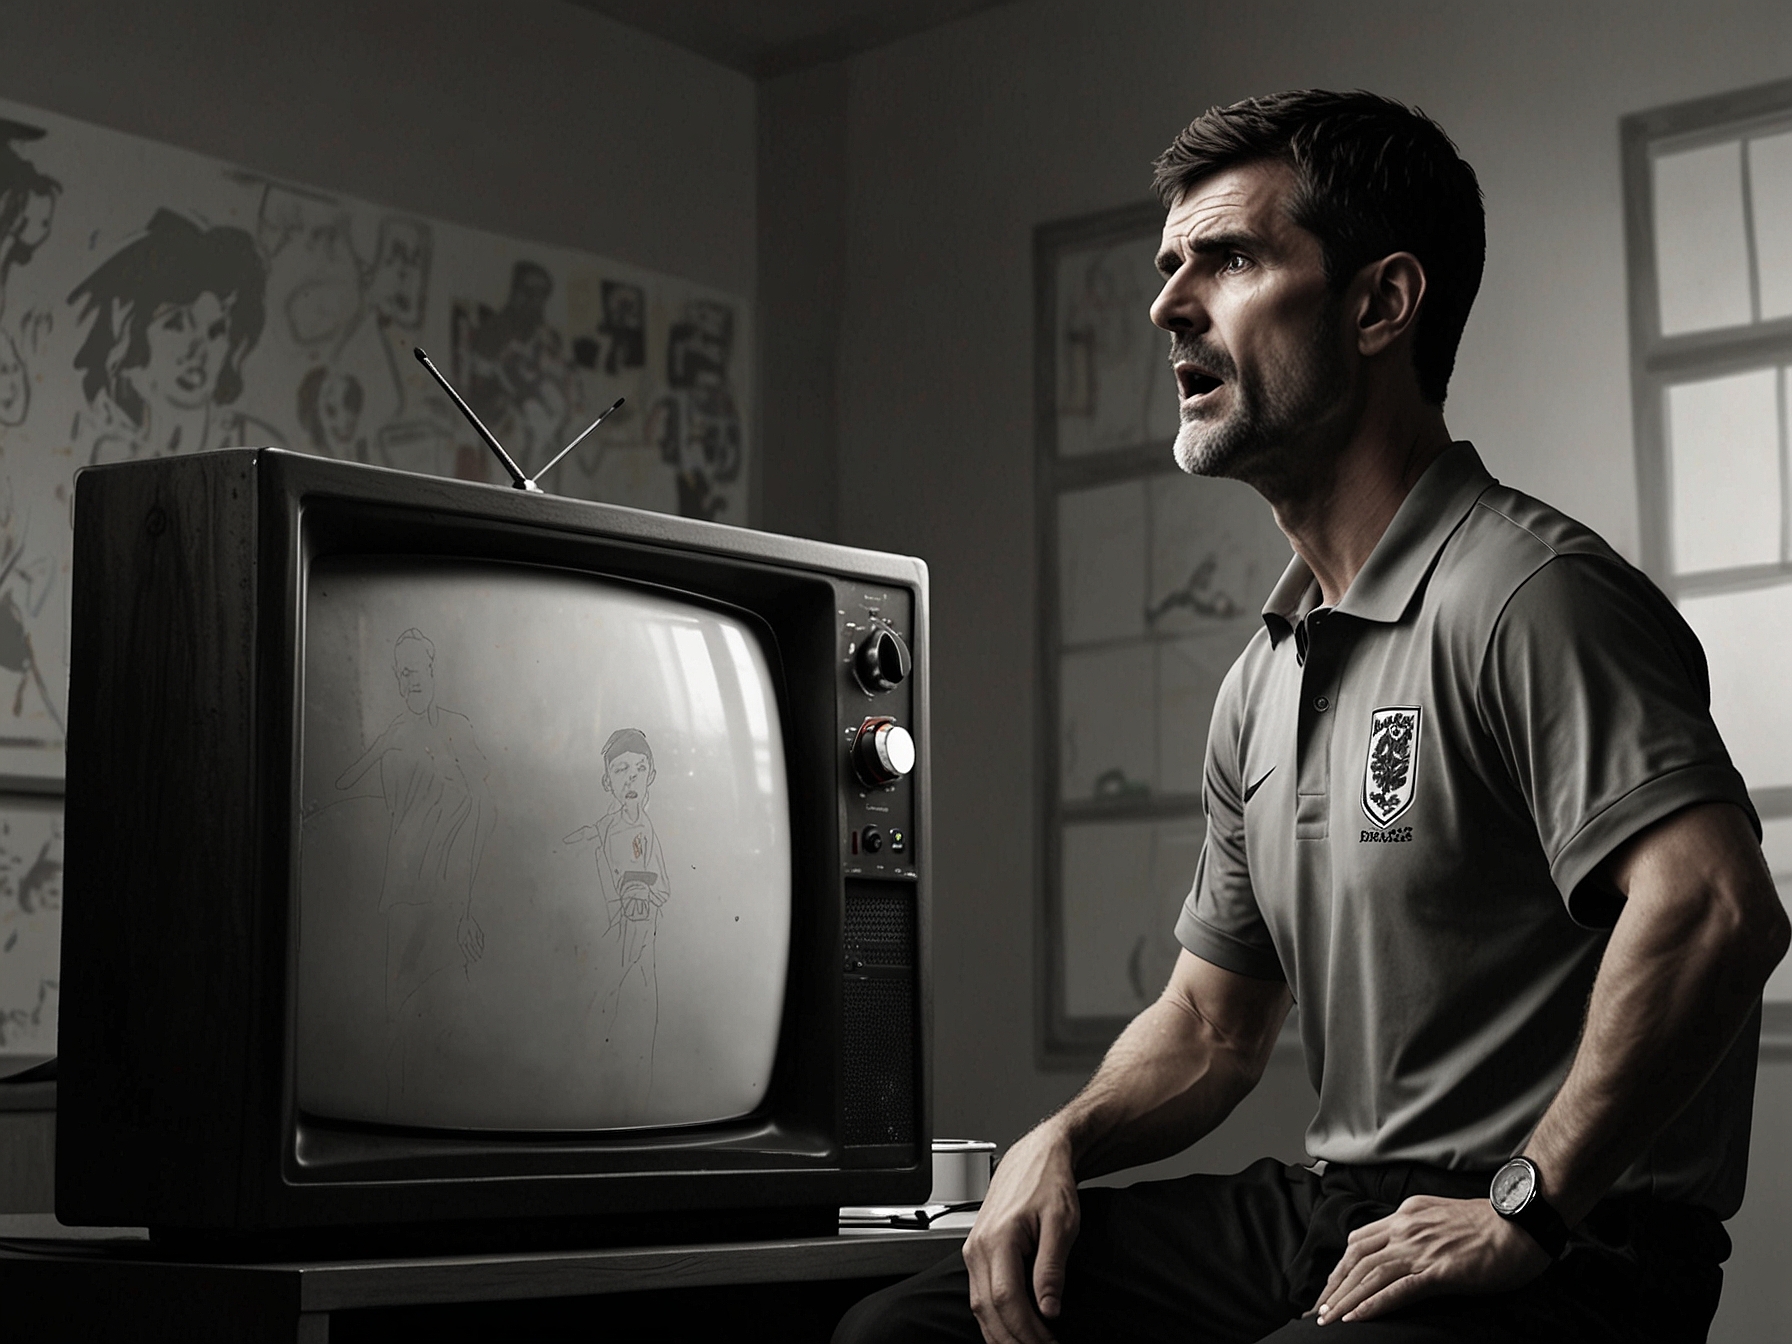 Roy Keane passionately critiques on television, emphasizing his points about England's need for more courage and bravery in their gameplay. His expression underscores the gravity of his concerns.